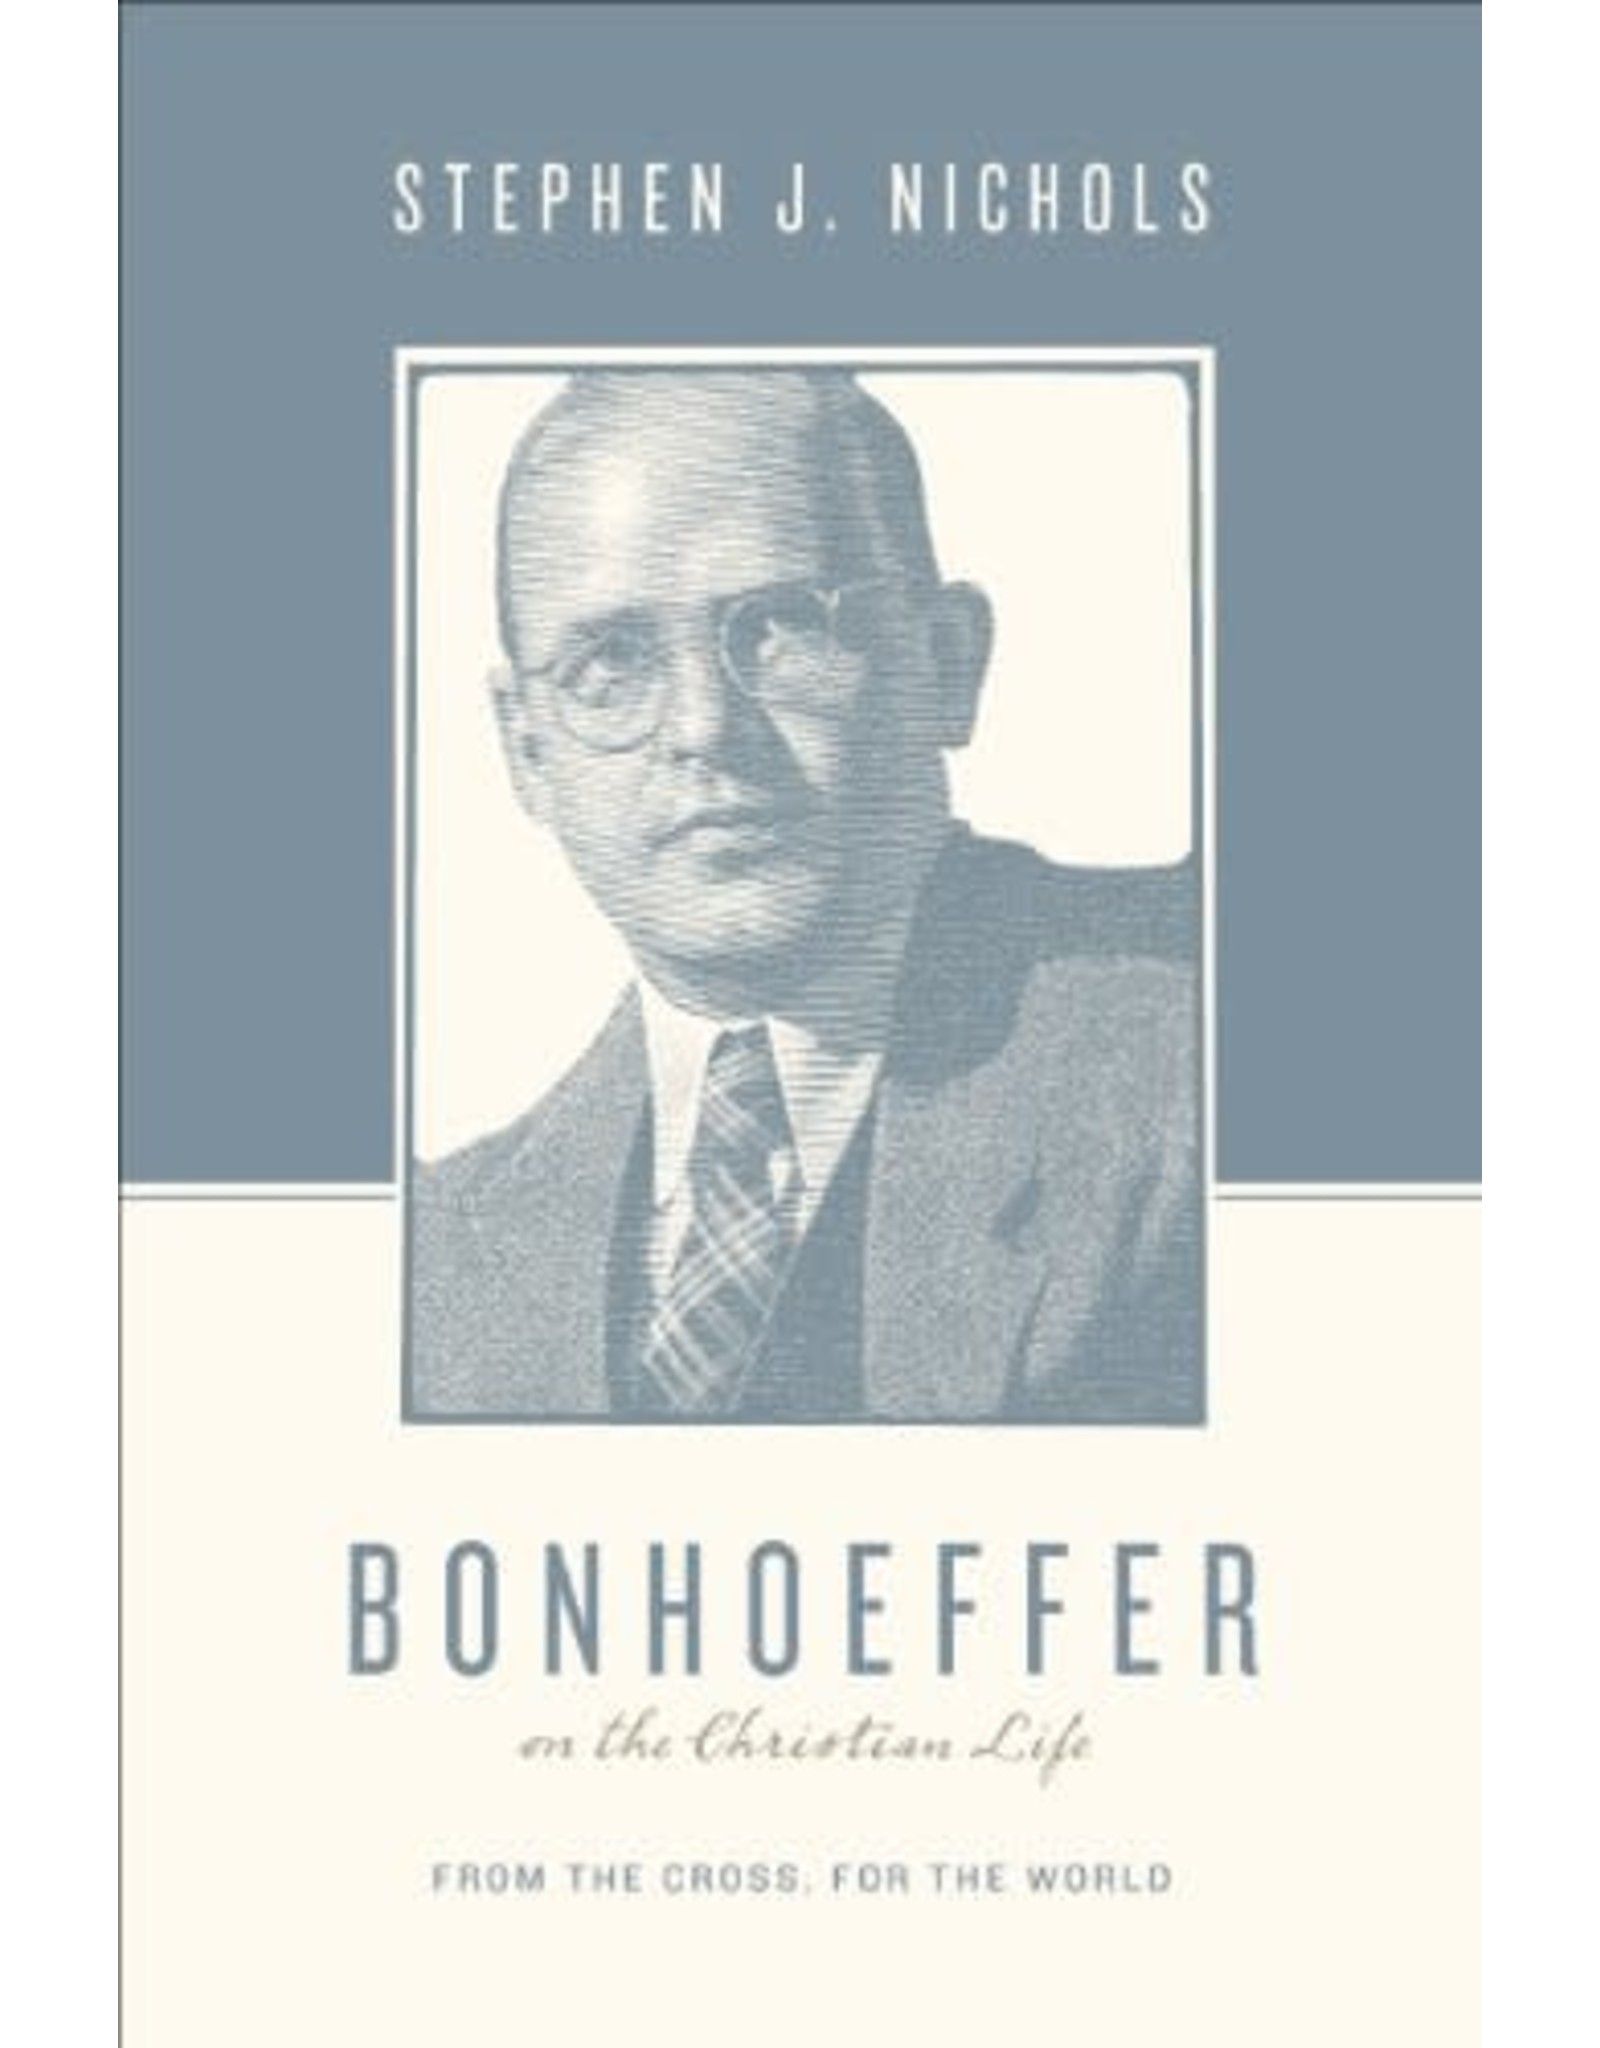 Crossway / Good News Bonhoeffer on the Christian Life: From the Cross, for the World